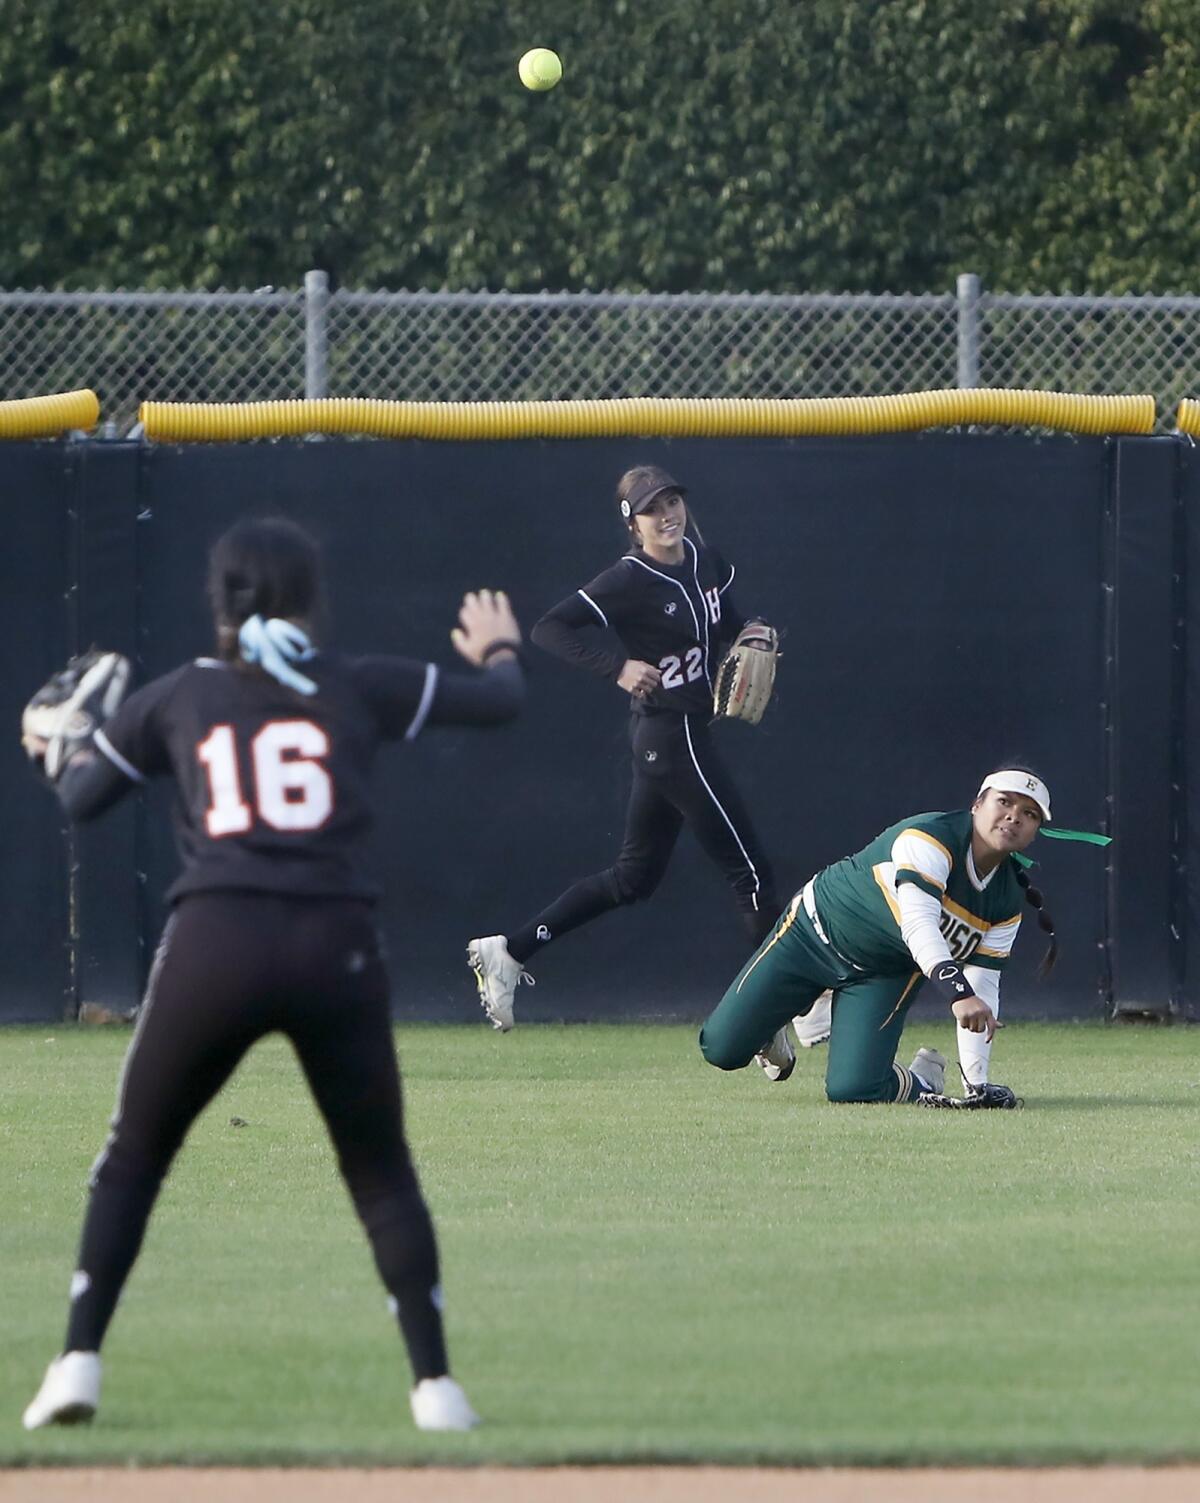 Edison's Jaelyn Operana, right, throws the ball to Huntington Beach's Megan Ryono, left, to start a triple play in the first inning of the Orange County Softball Coaches All-Star Classic on May 21. She made a diving catch as Huntington Beach's Jadelyn Allchin, center, looked on.